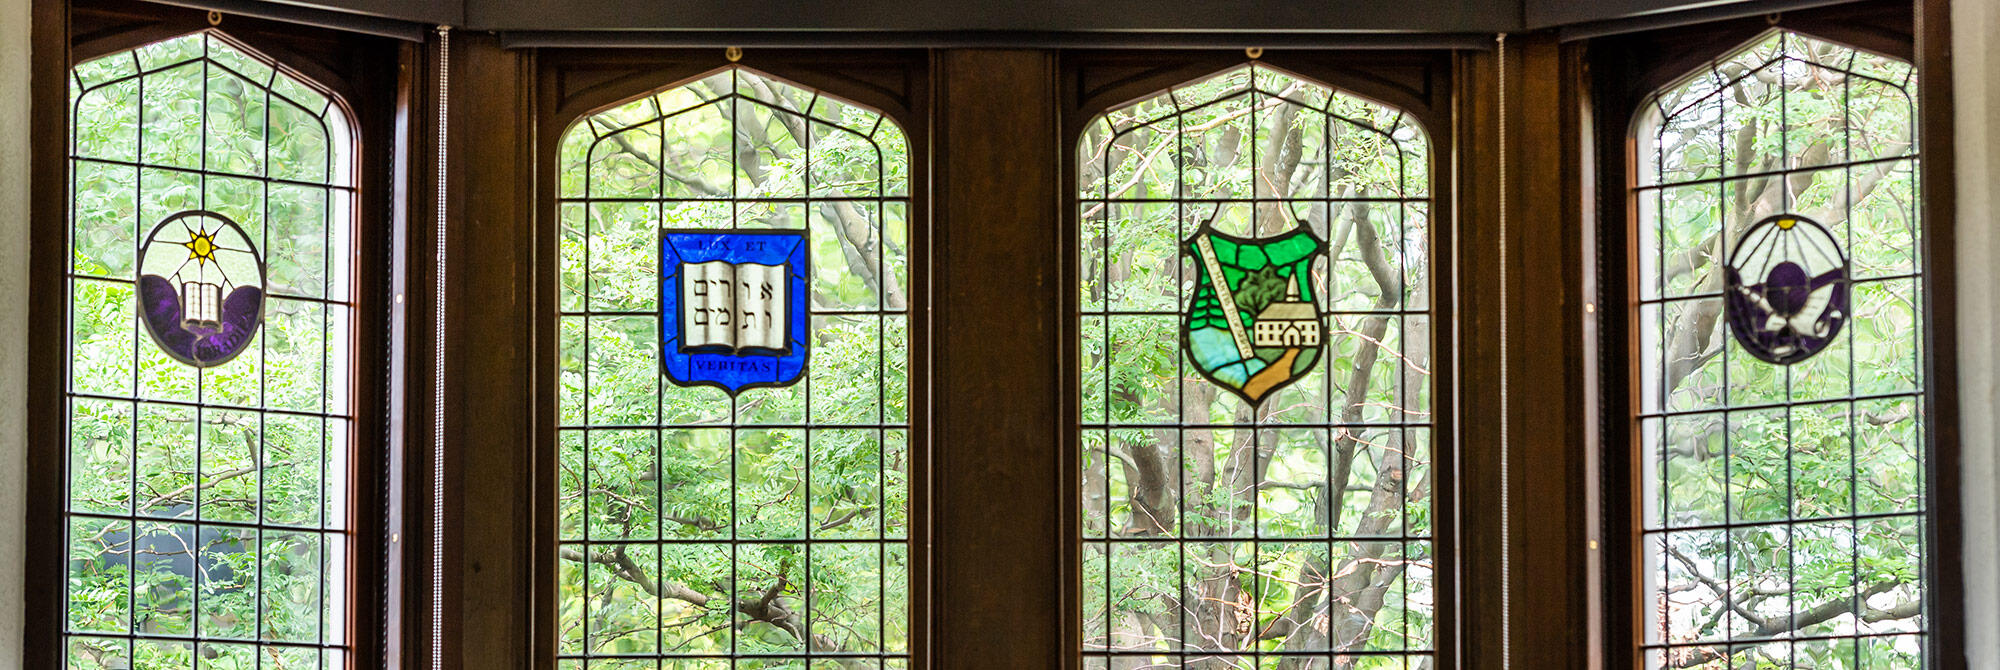 Windows with decorative stained glass emblems